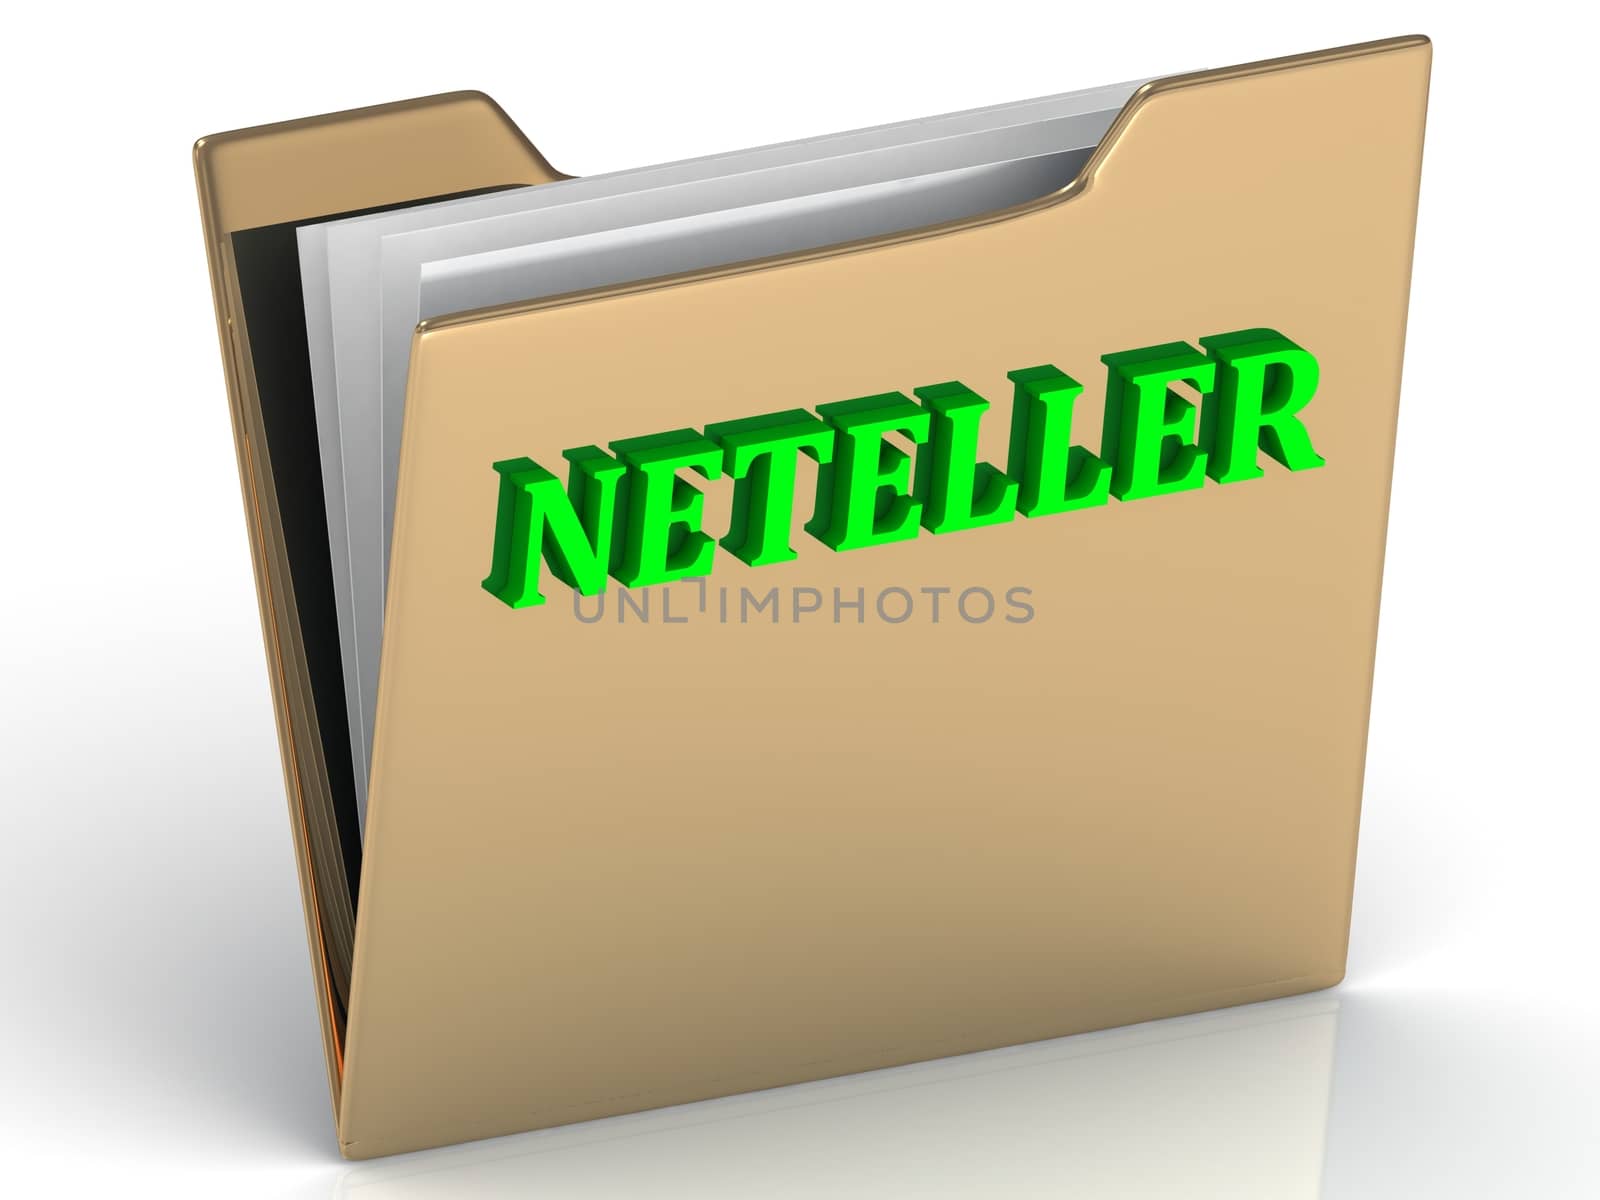 NETELLER - bright letters on a gold folder on a white background